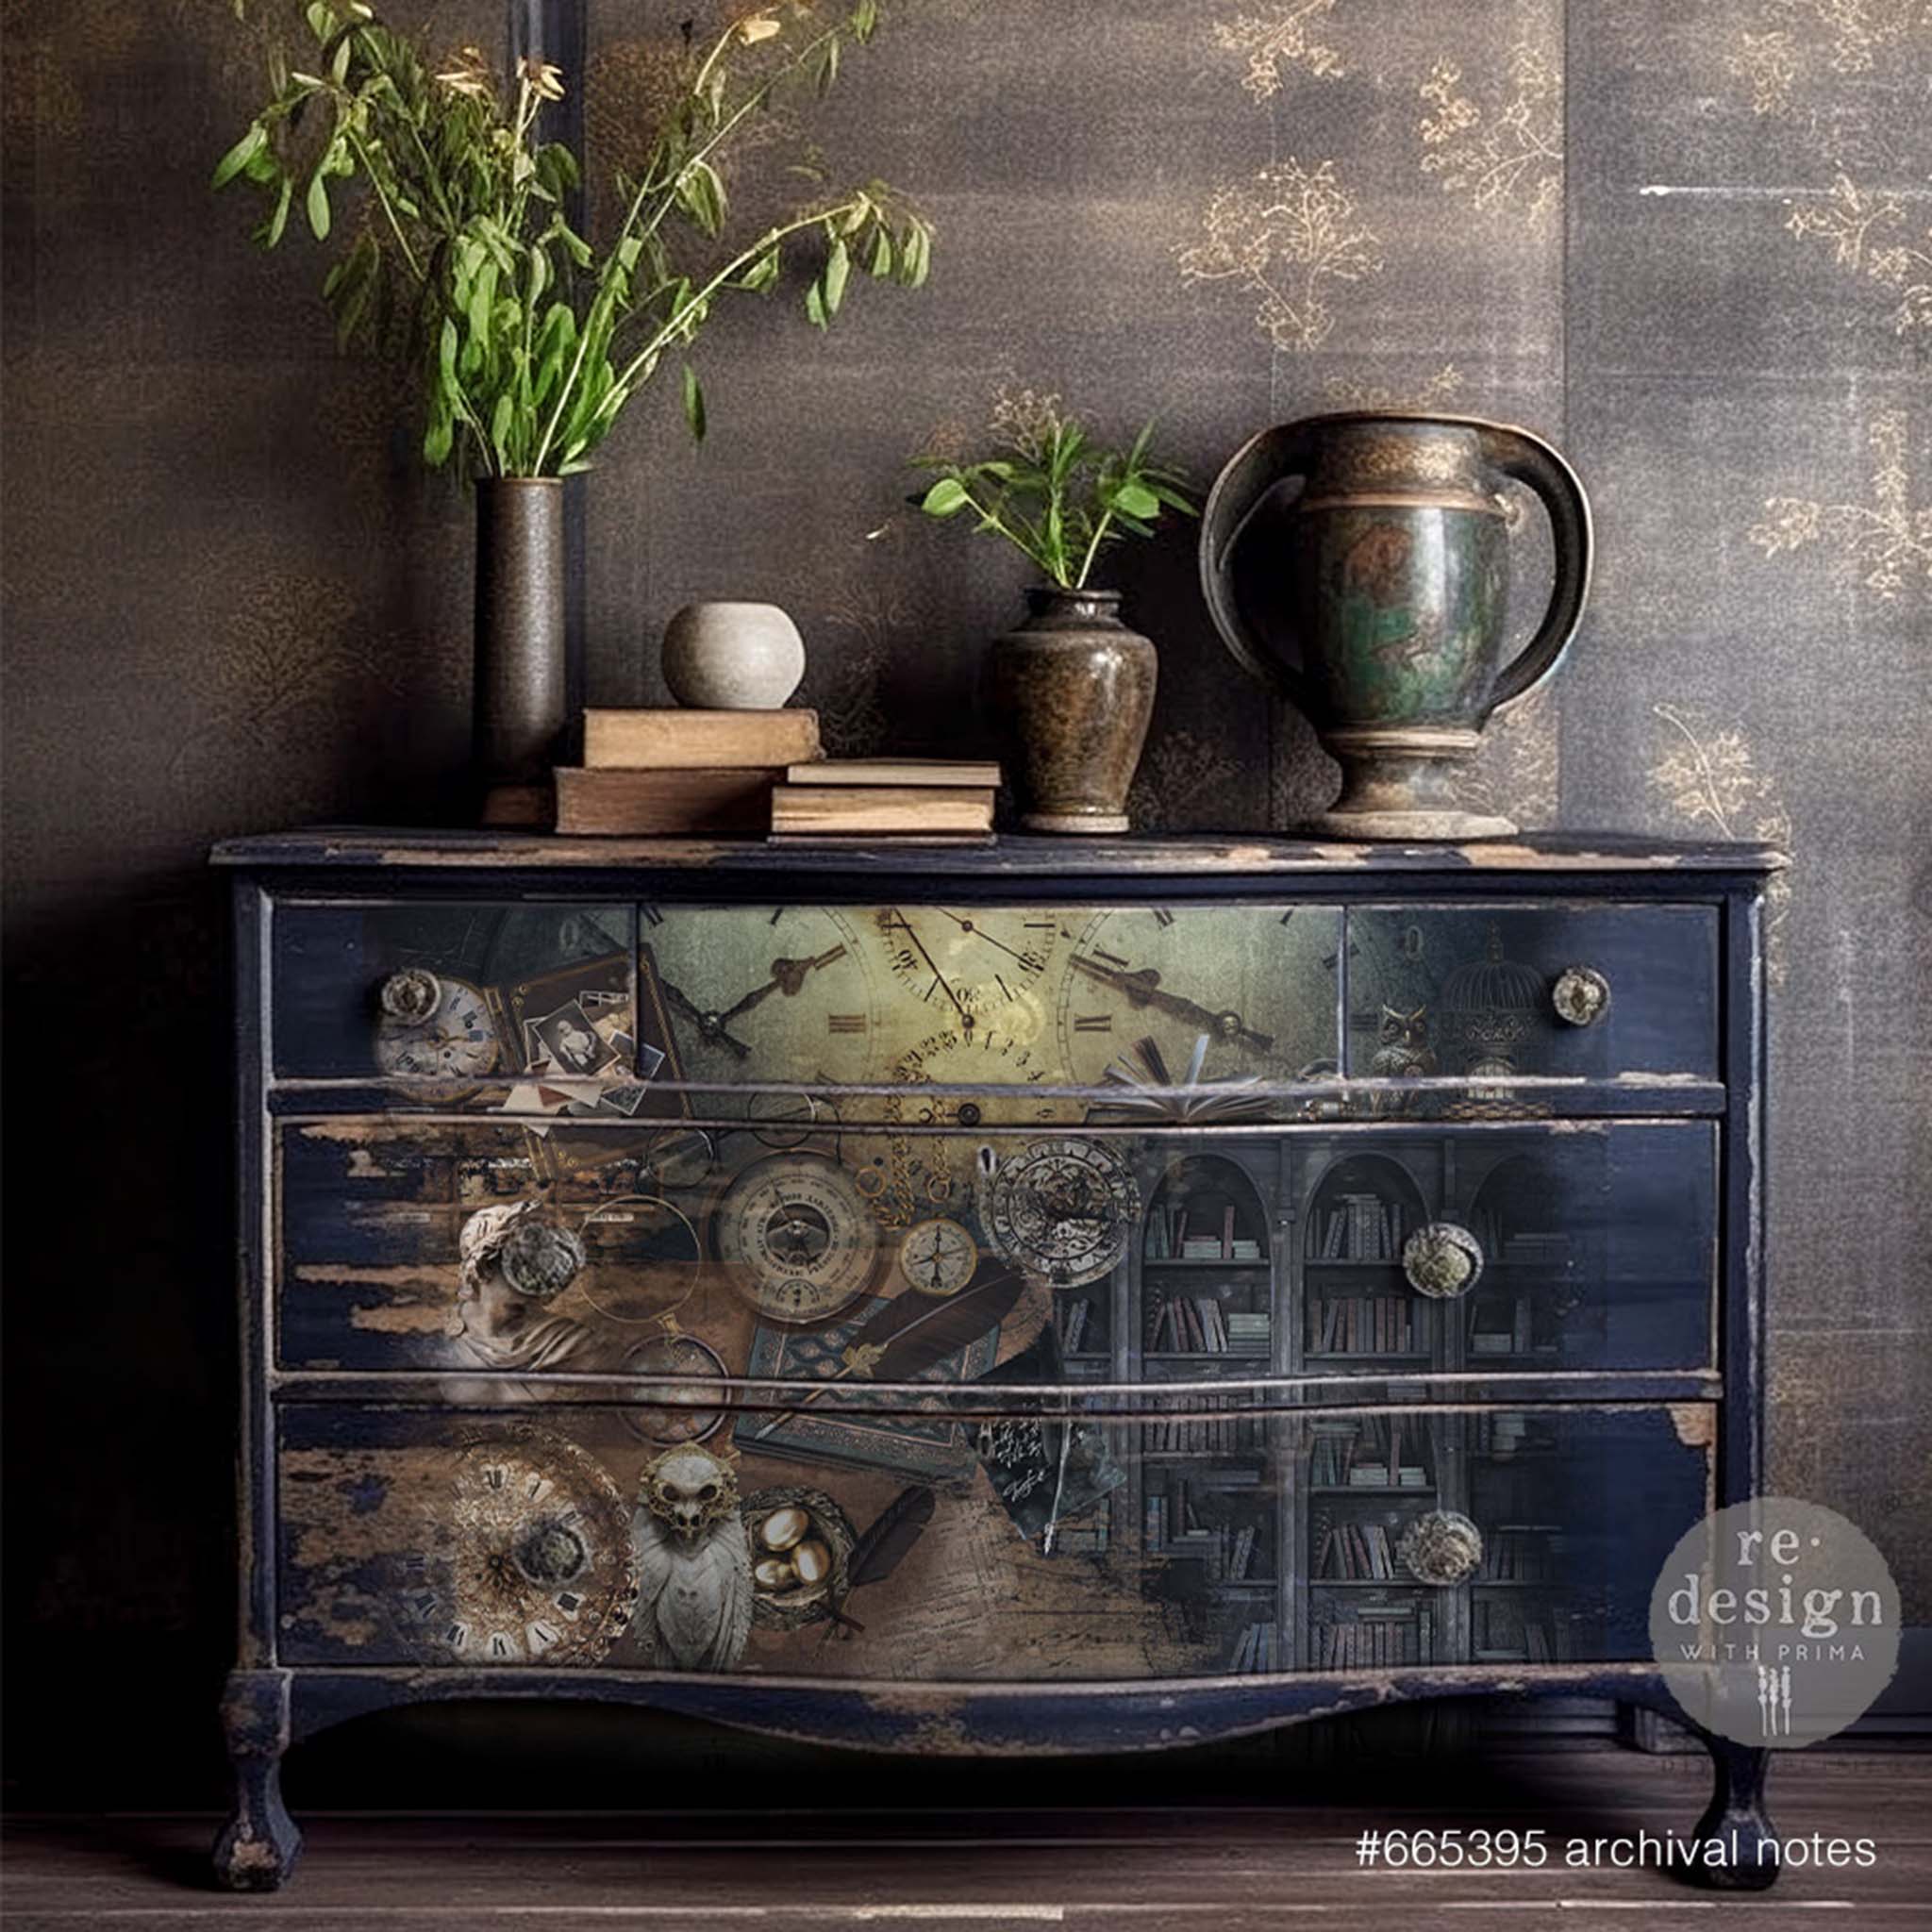 A vintage 3-drawer dresser refurbished by ReDesign with Prima is painted a distressed dark blue and features the Archival Notes A1 fiber paper on its drawers.